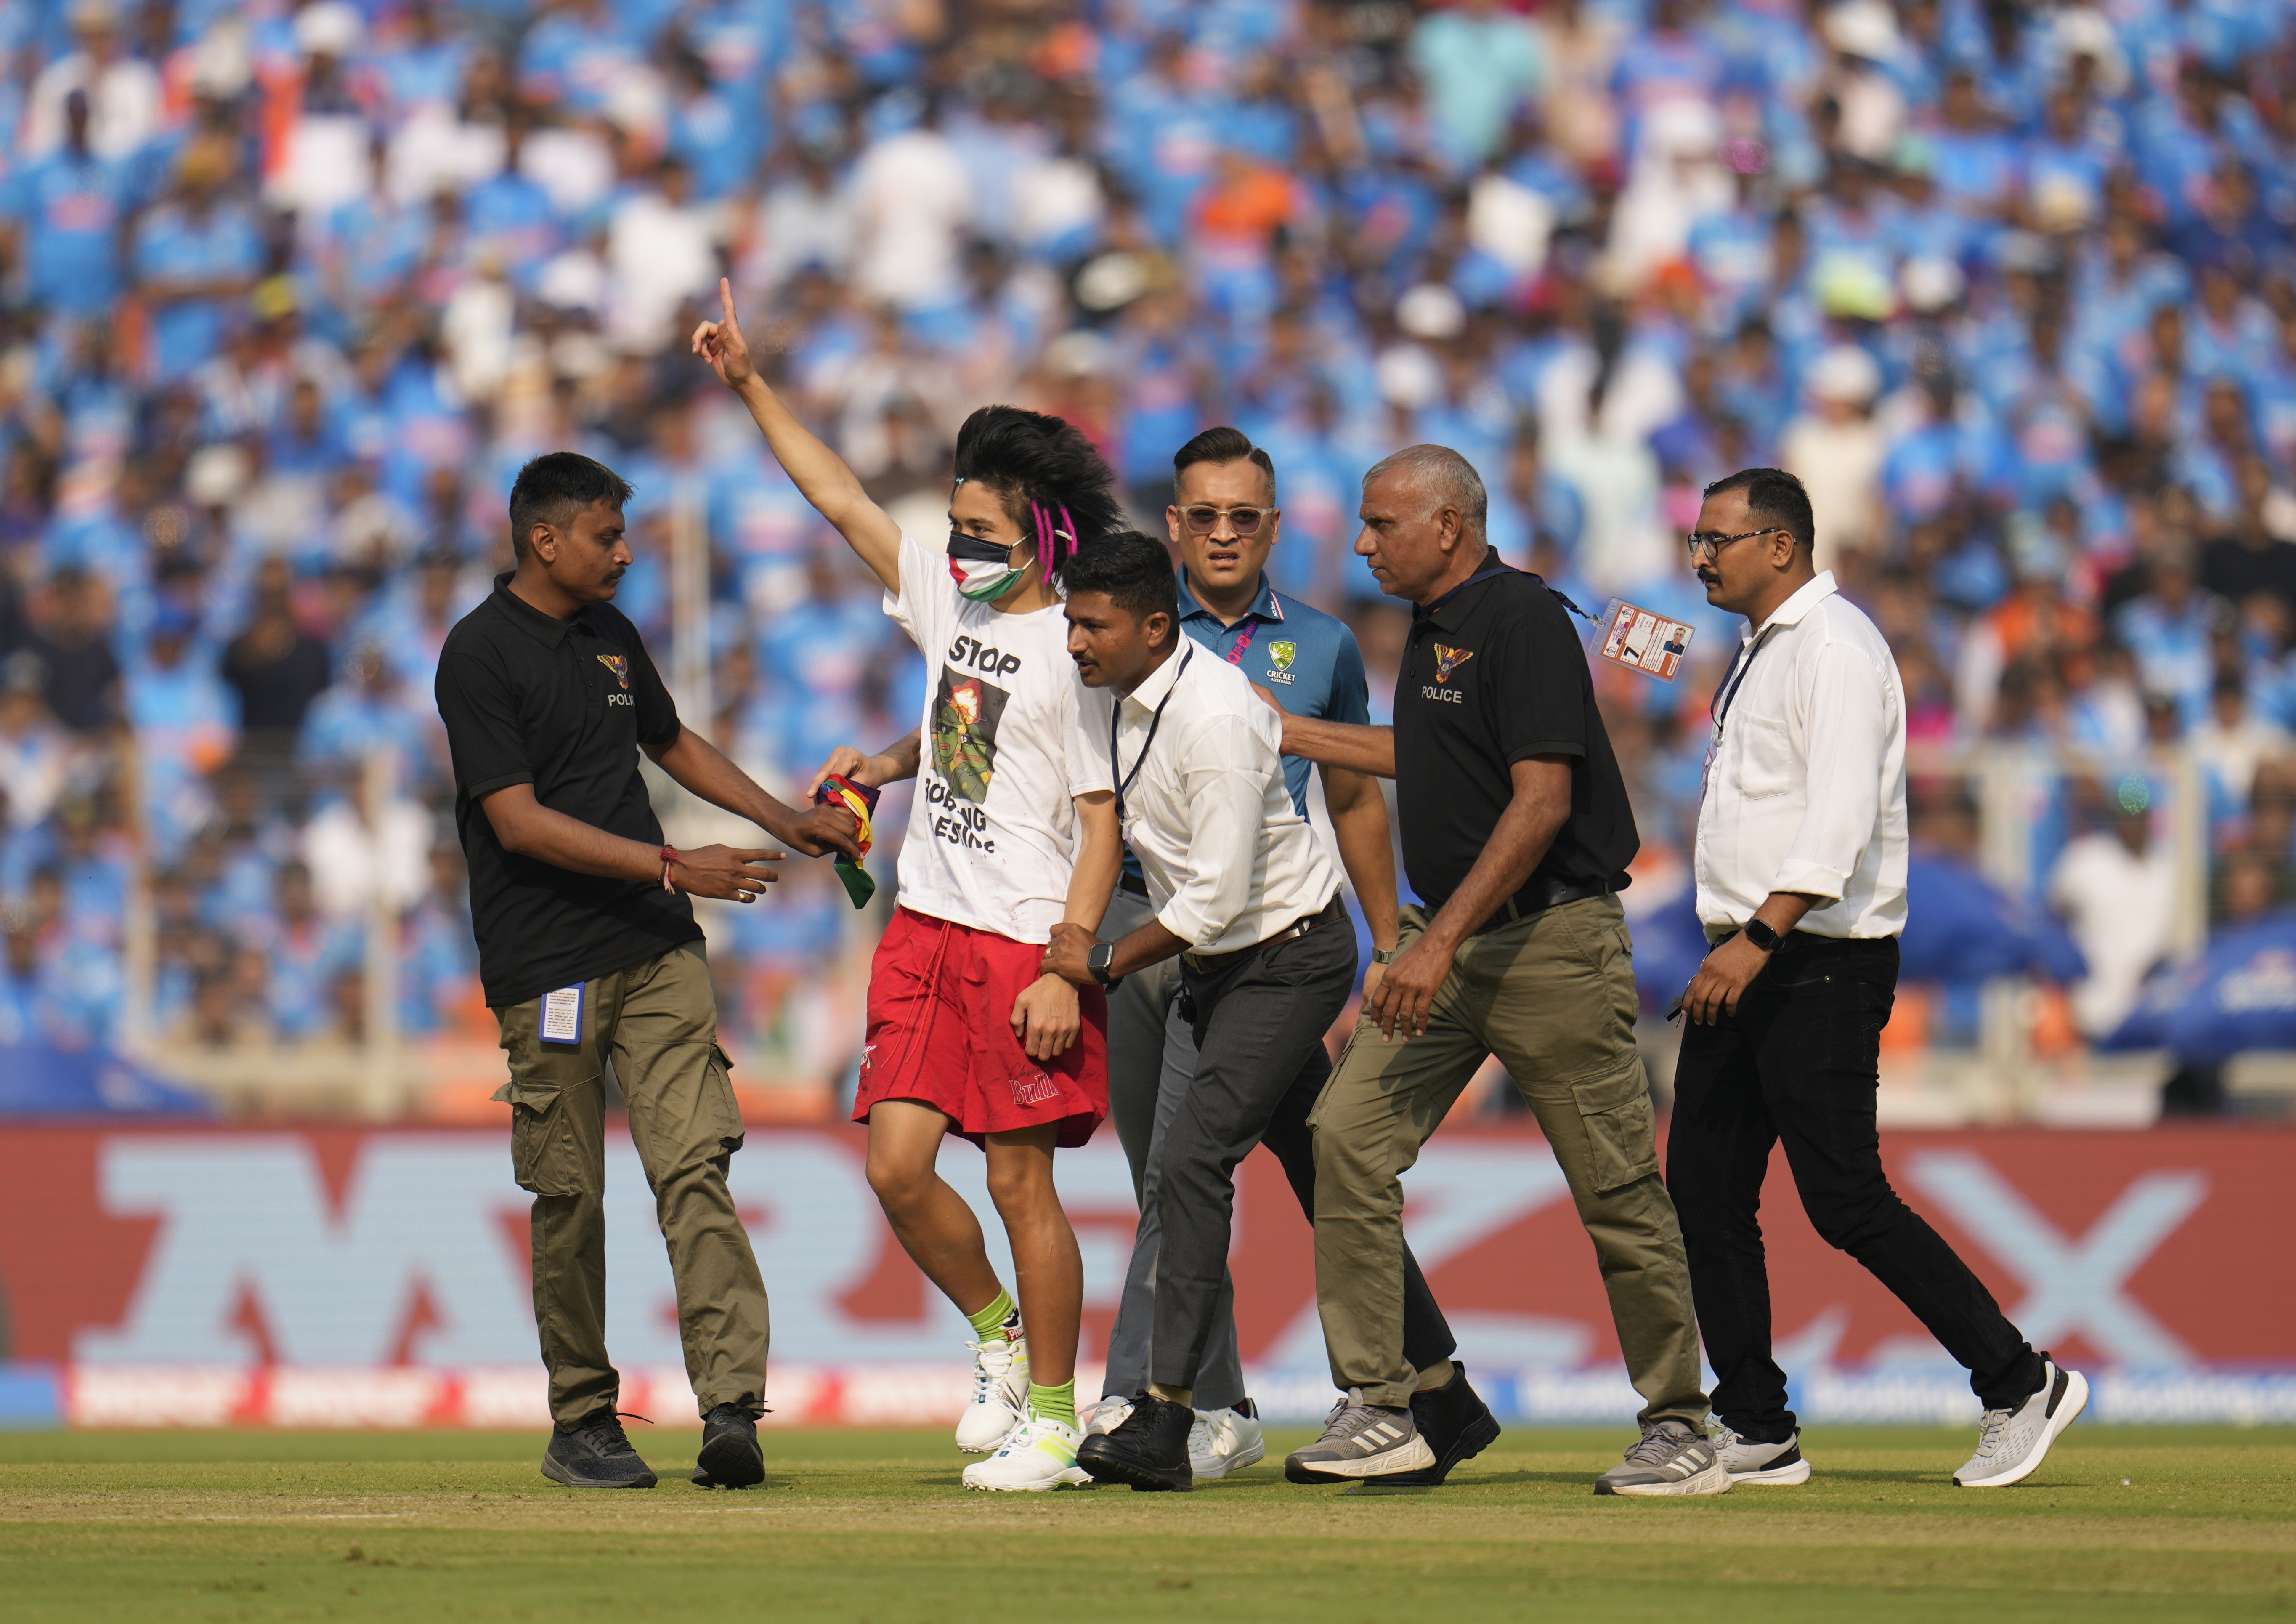 Gujarat Police are yet to identify the pitch invader who has been escorted out of the stadium, after his short cameo with Indian batting great Virat Kohli in the middle. The invader who was wearing a green, red, white and black facemask, colours that denote Palestine, managed to enter the ground and reach Kohli.